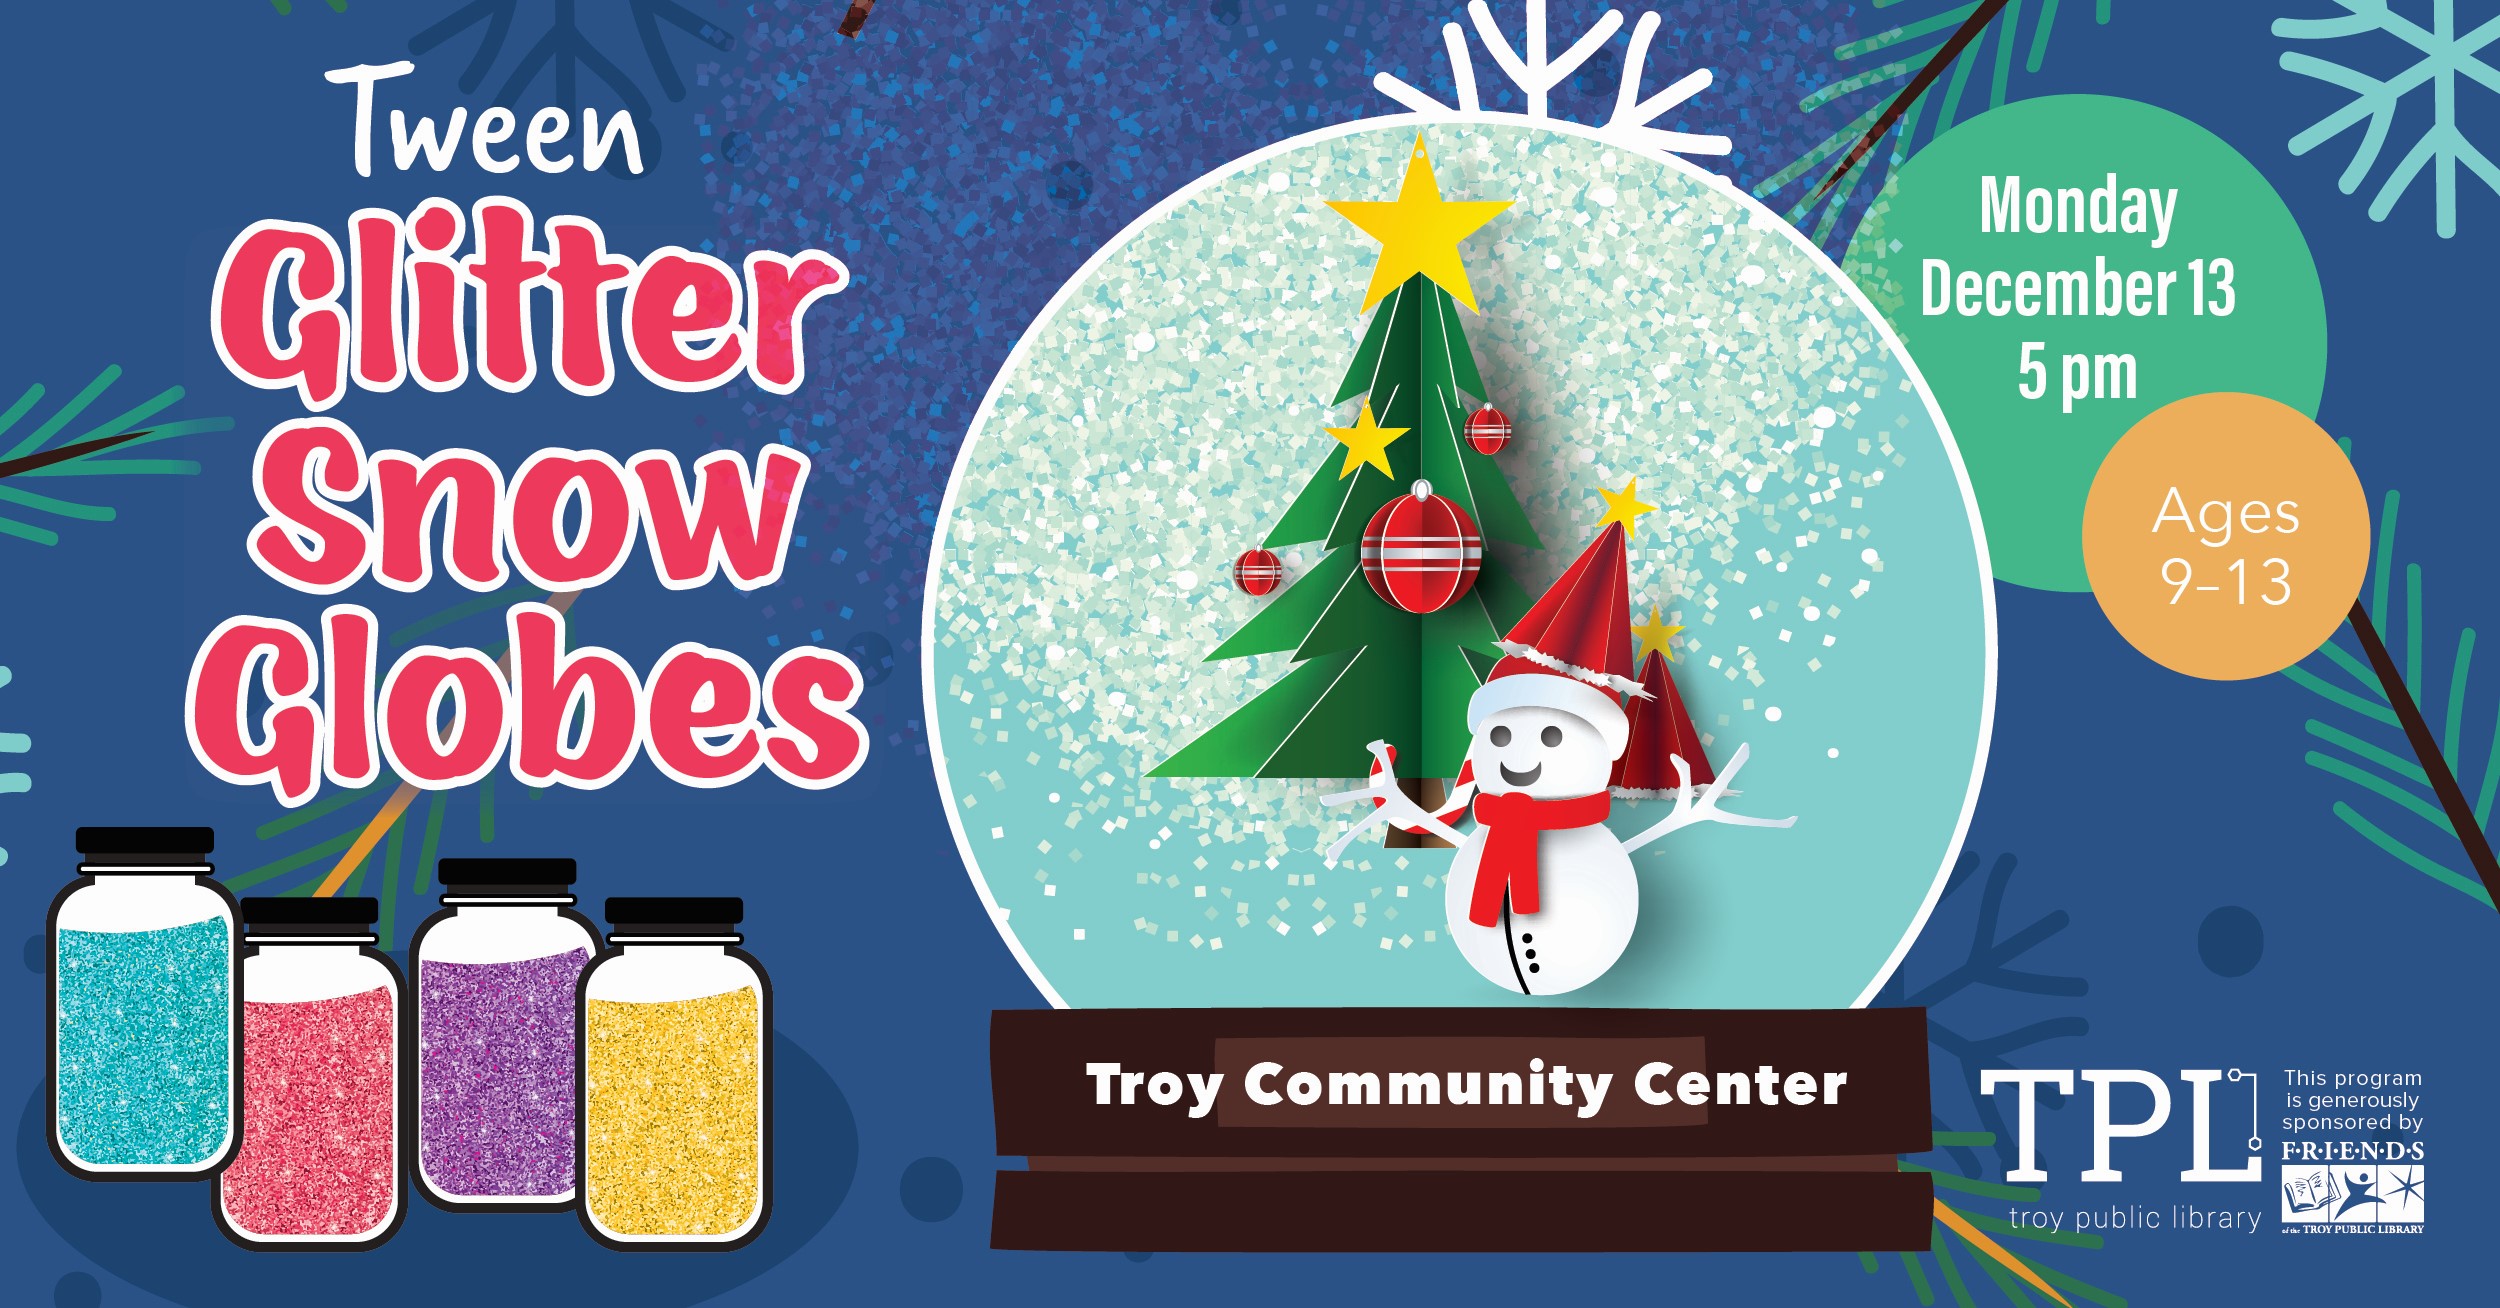 Tween Glitter Snow Globes. Ages 9 to 13. Monday, December 13 at 5pm at the Troy Community Center. Sponsored by Friends of the Troy Public Library